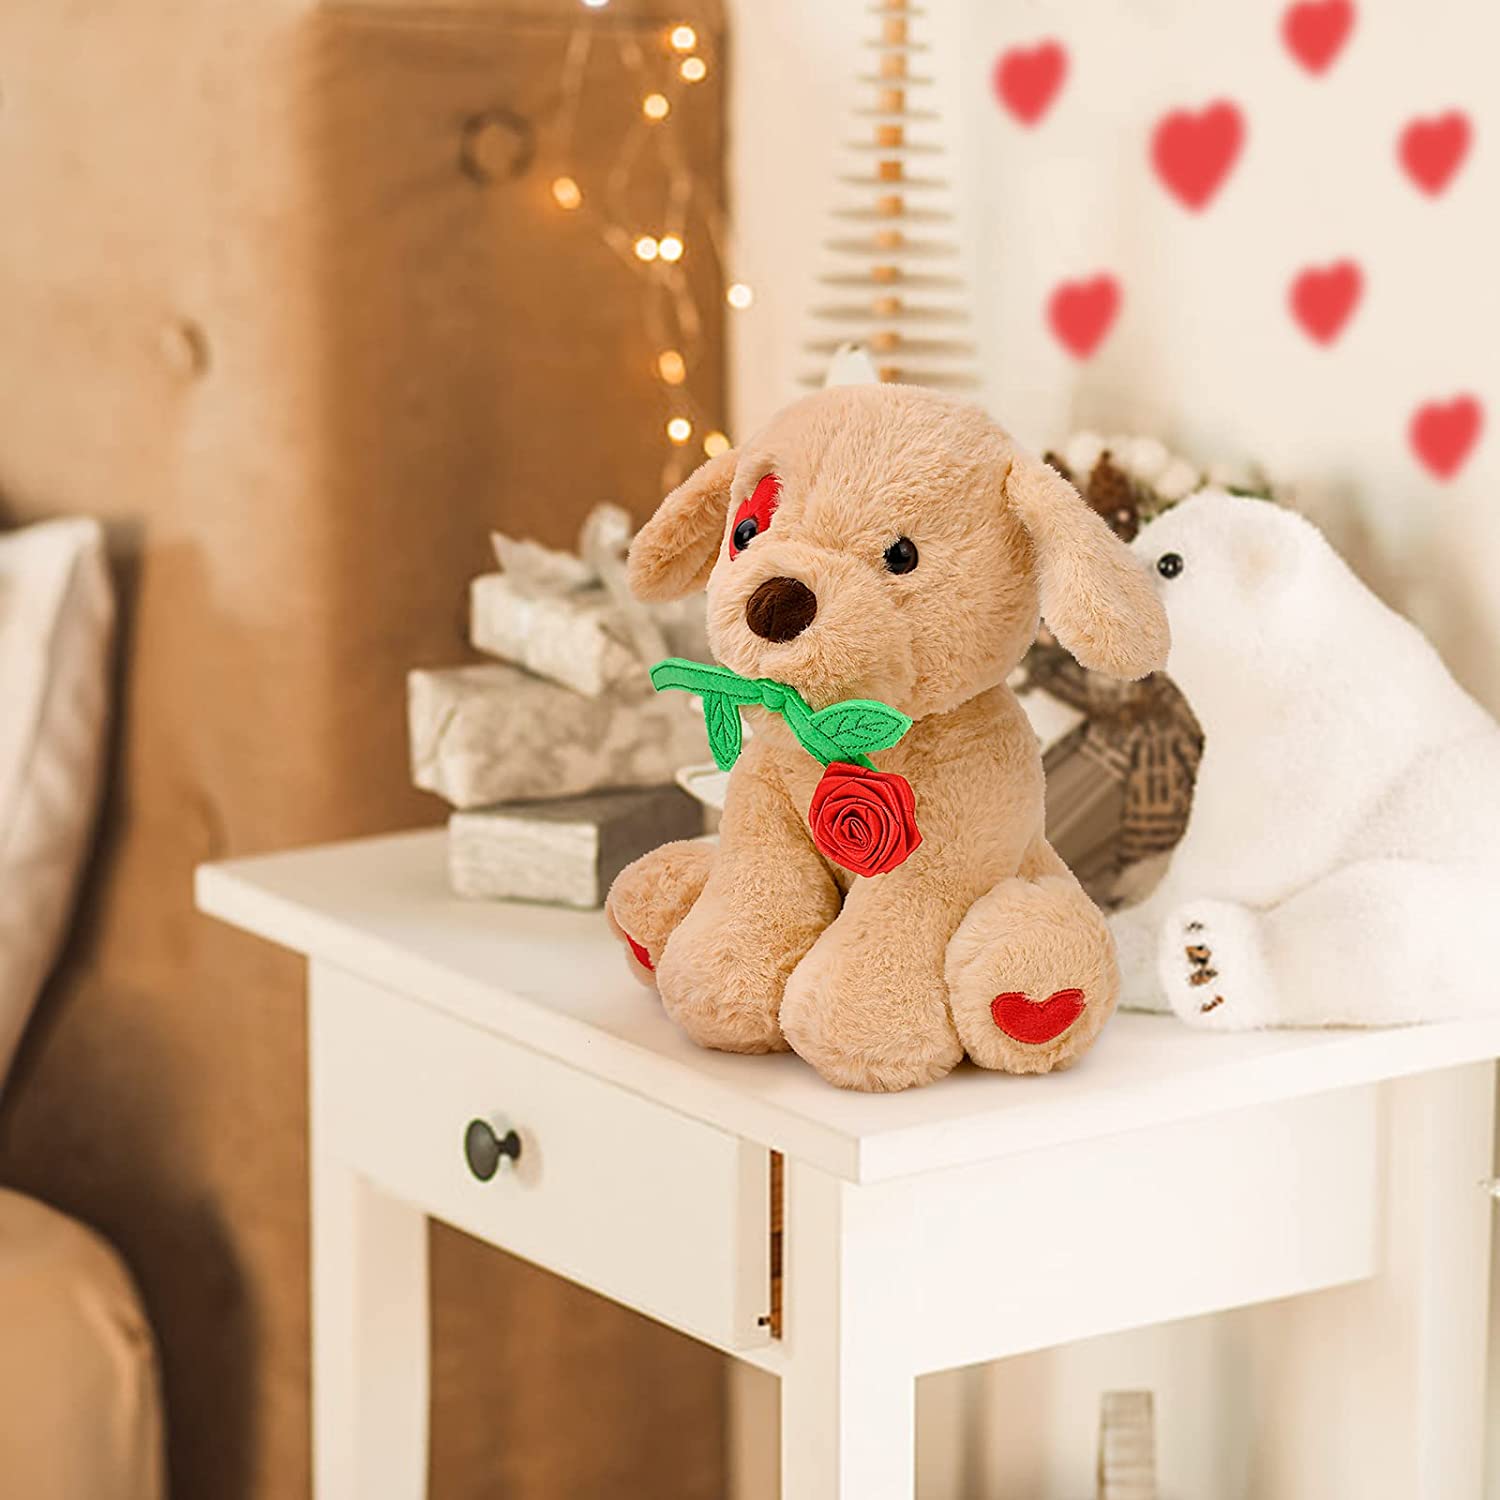 I Love You! 11'' Teddy Bear with Red Heart Valentines Day Gifts for Her,  Soft Plush Bear Doll Stuffed Animal Toys for Kids - Walmart.com